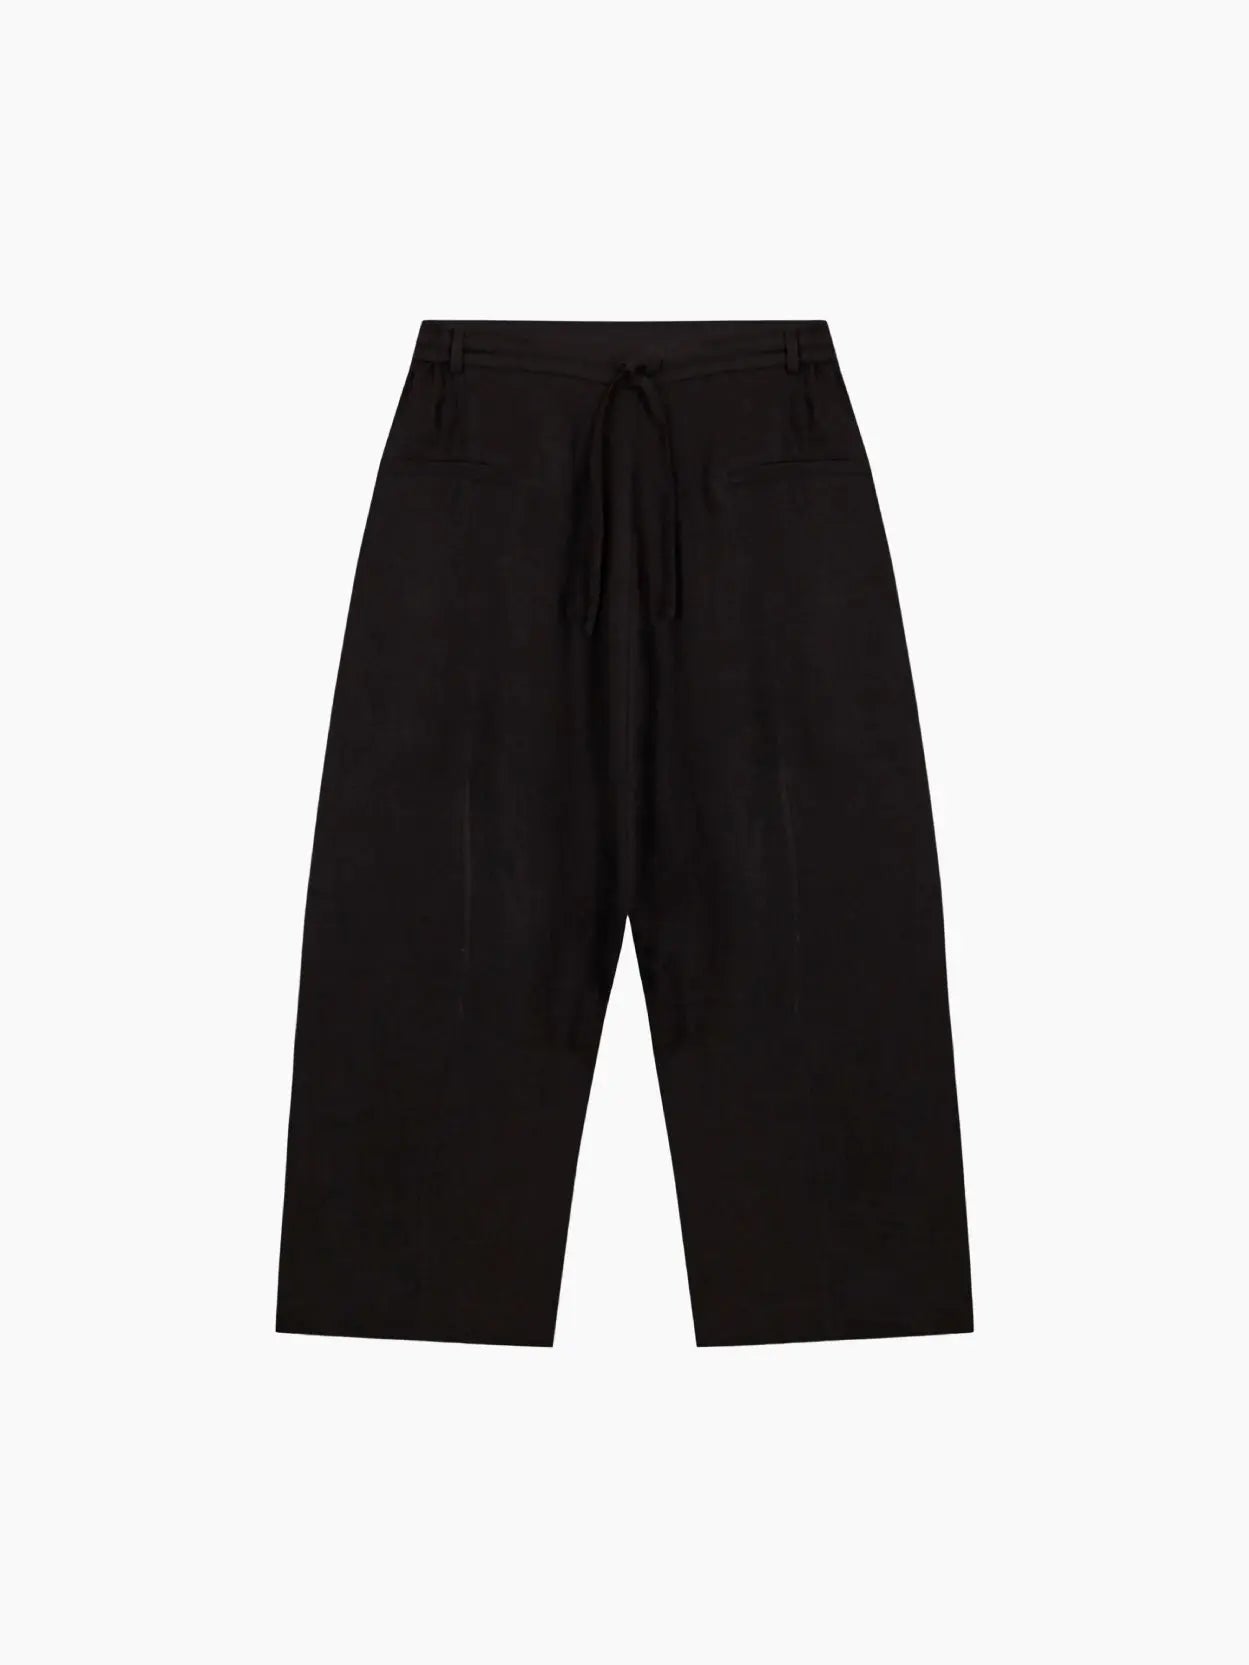 A pair of Linen Maxi Pants Black with a drawstring waistband is shown against a white background. The pants, available at Bassalstore in Barcelona, feature side pockets and have a relaxed fit. These pants are from the brand Cordera.